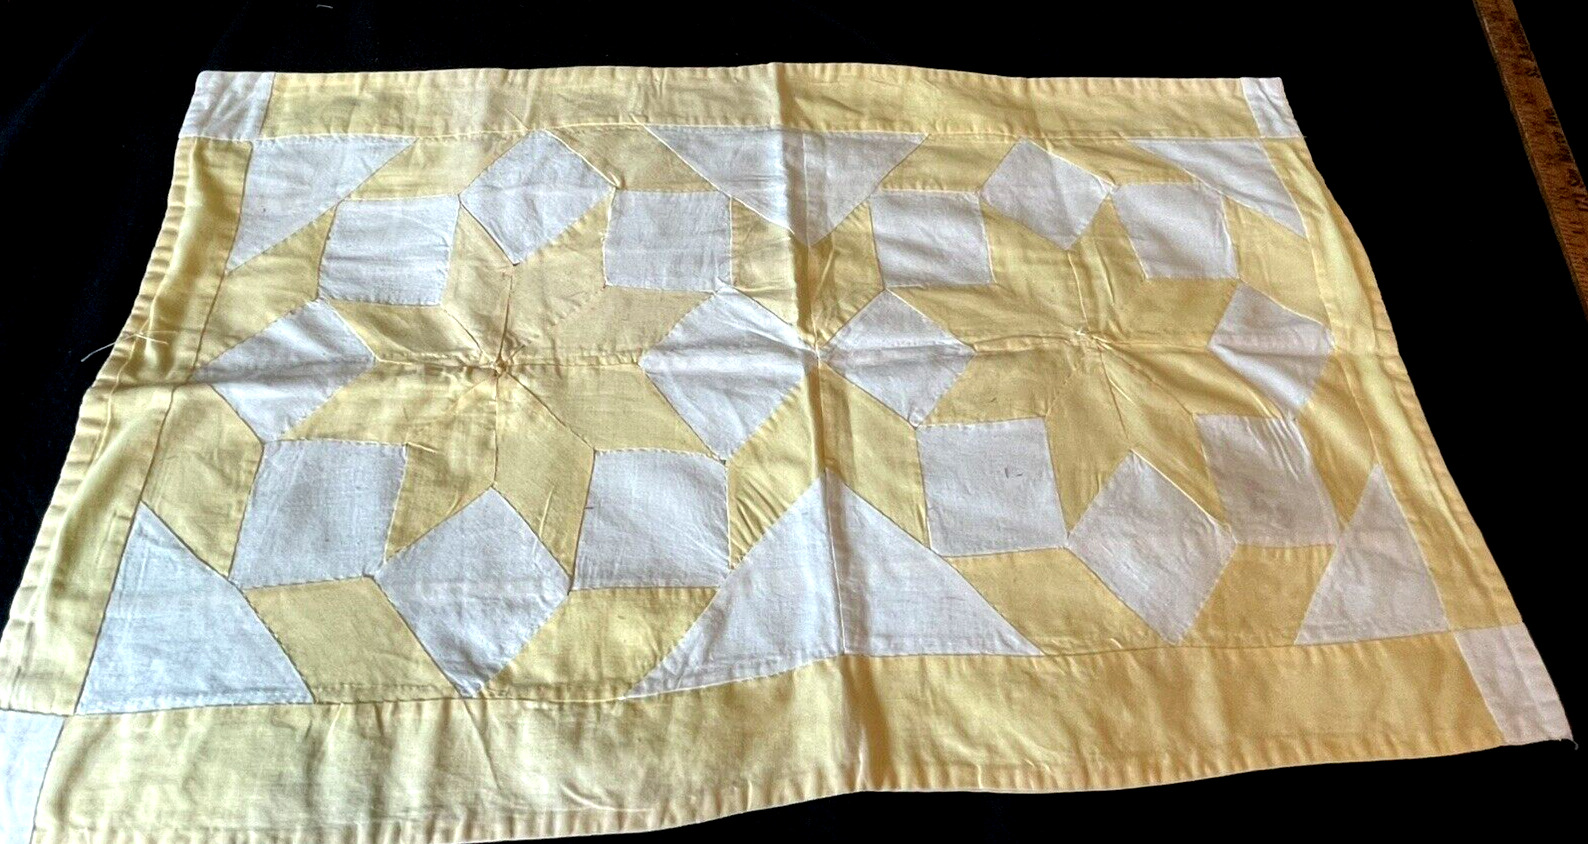 1930S CHILD\'S DOLL BED QUILT-DIAMOND PATTERN, SOFT BUTTER YELLOW/OFF WHITE 25X15